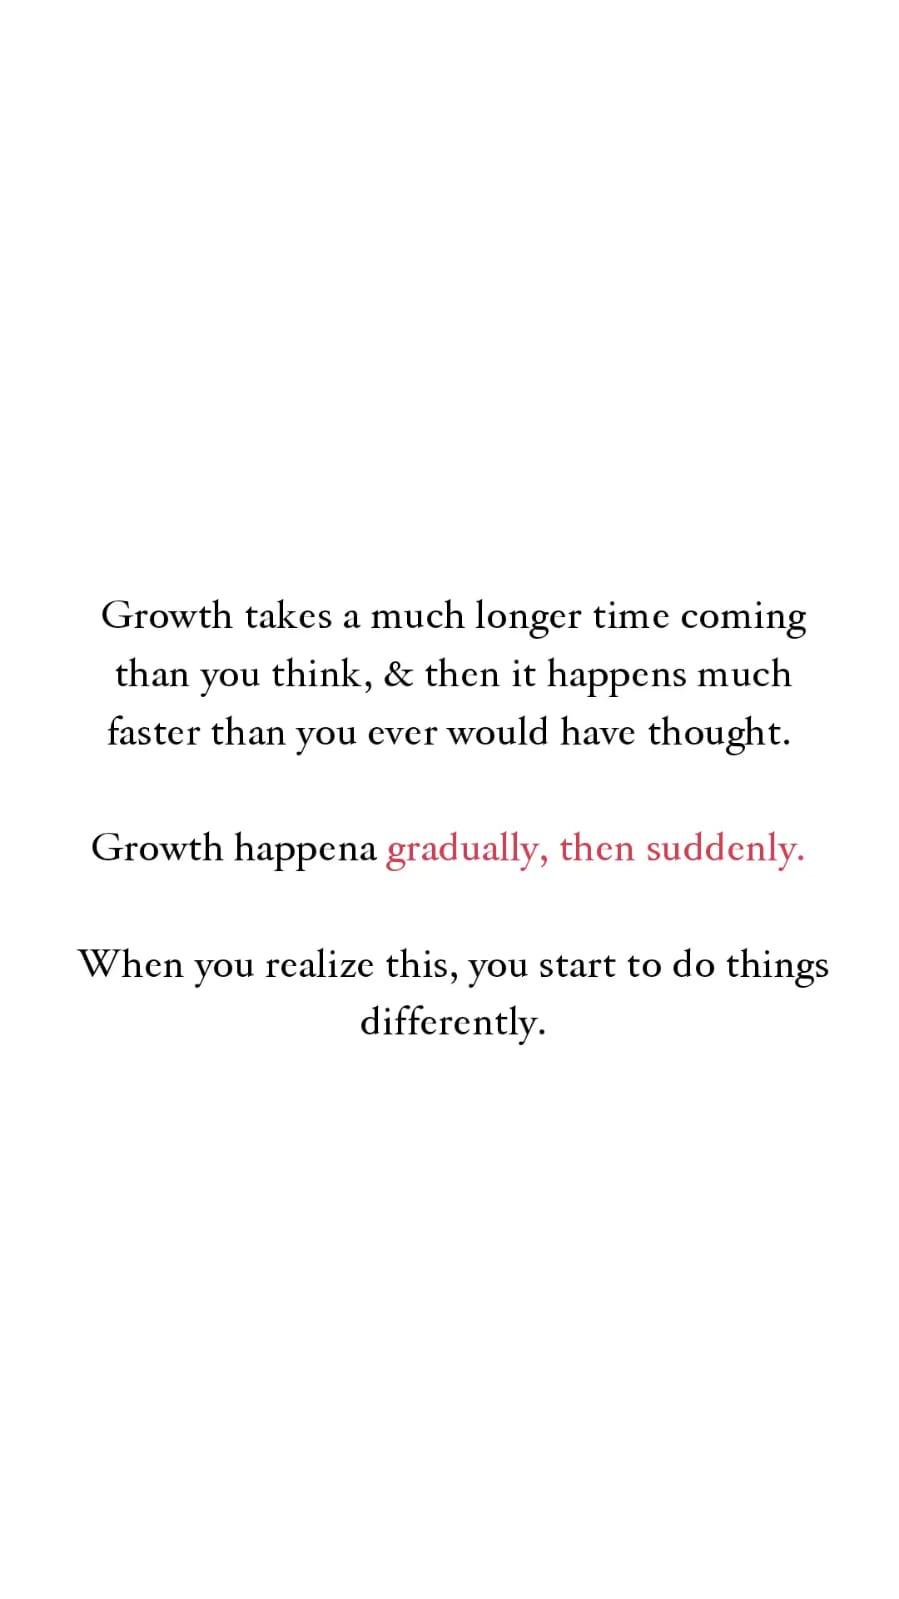 The Growth Paradox.